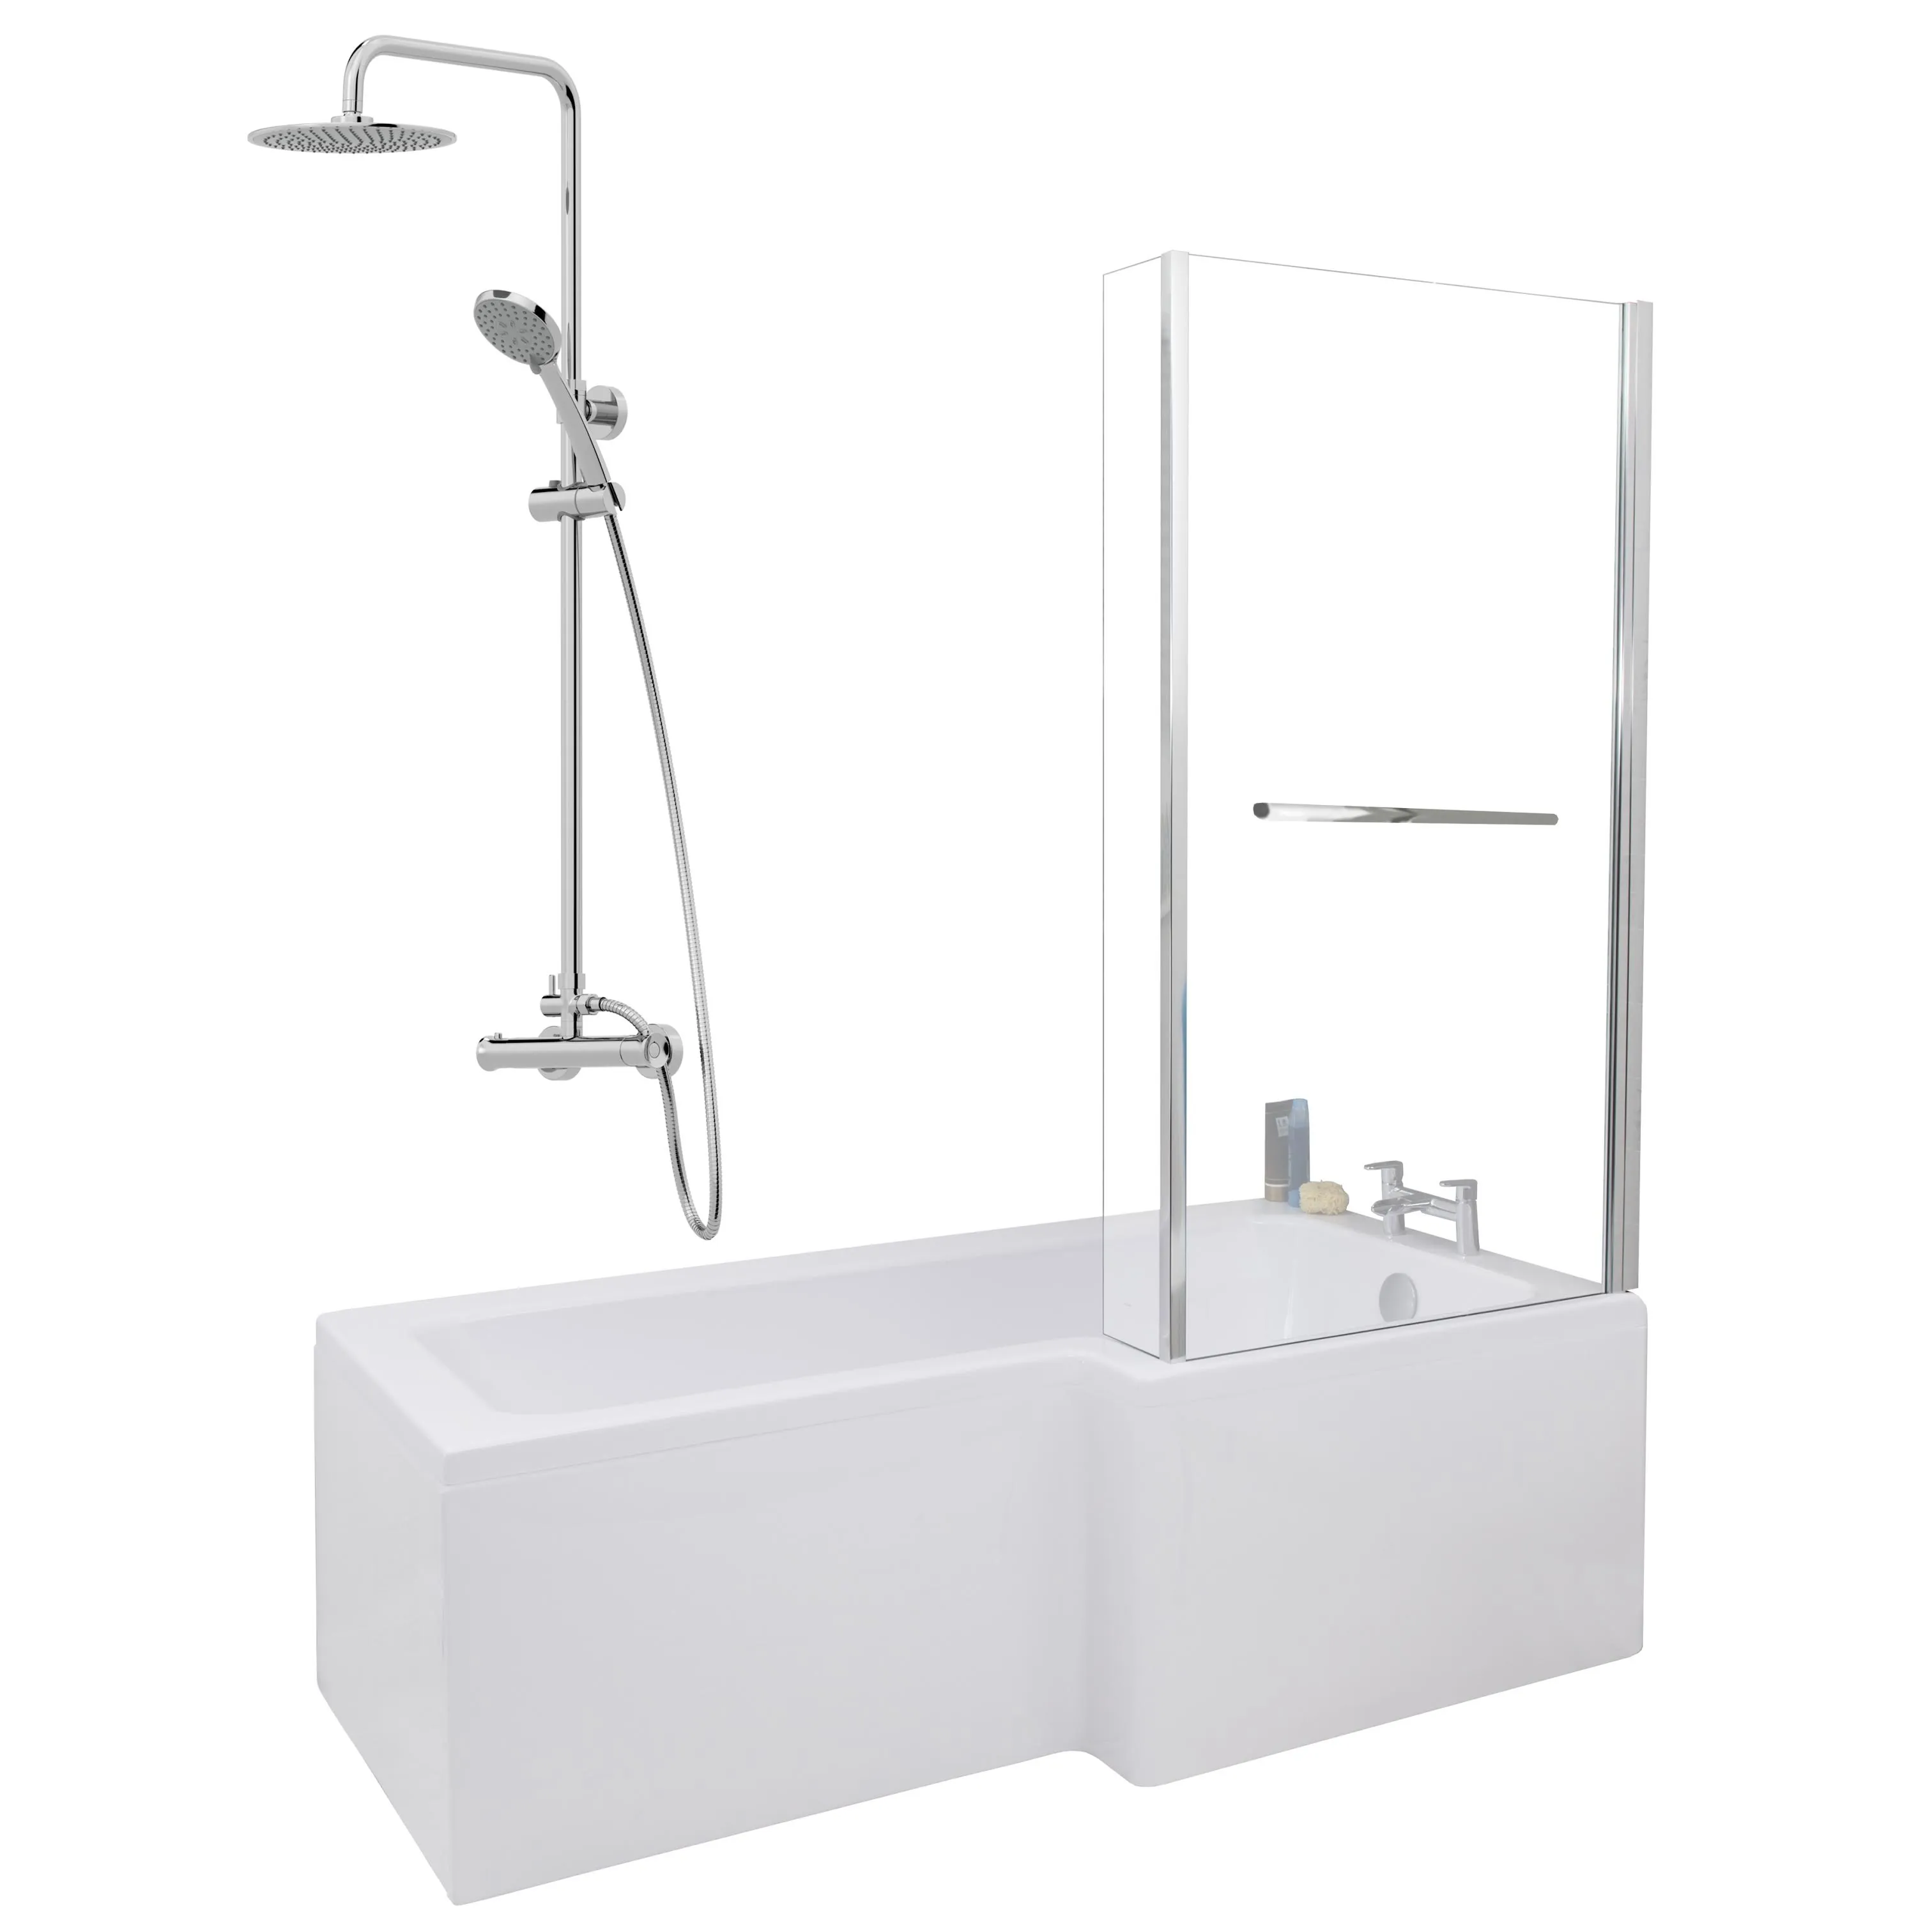 Ceramica L 1700 Right Shower Bath - Screen With Rail, Chrome Round Mixer Shower & Side Panel